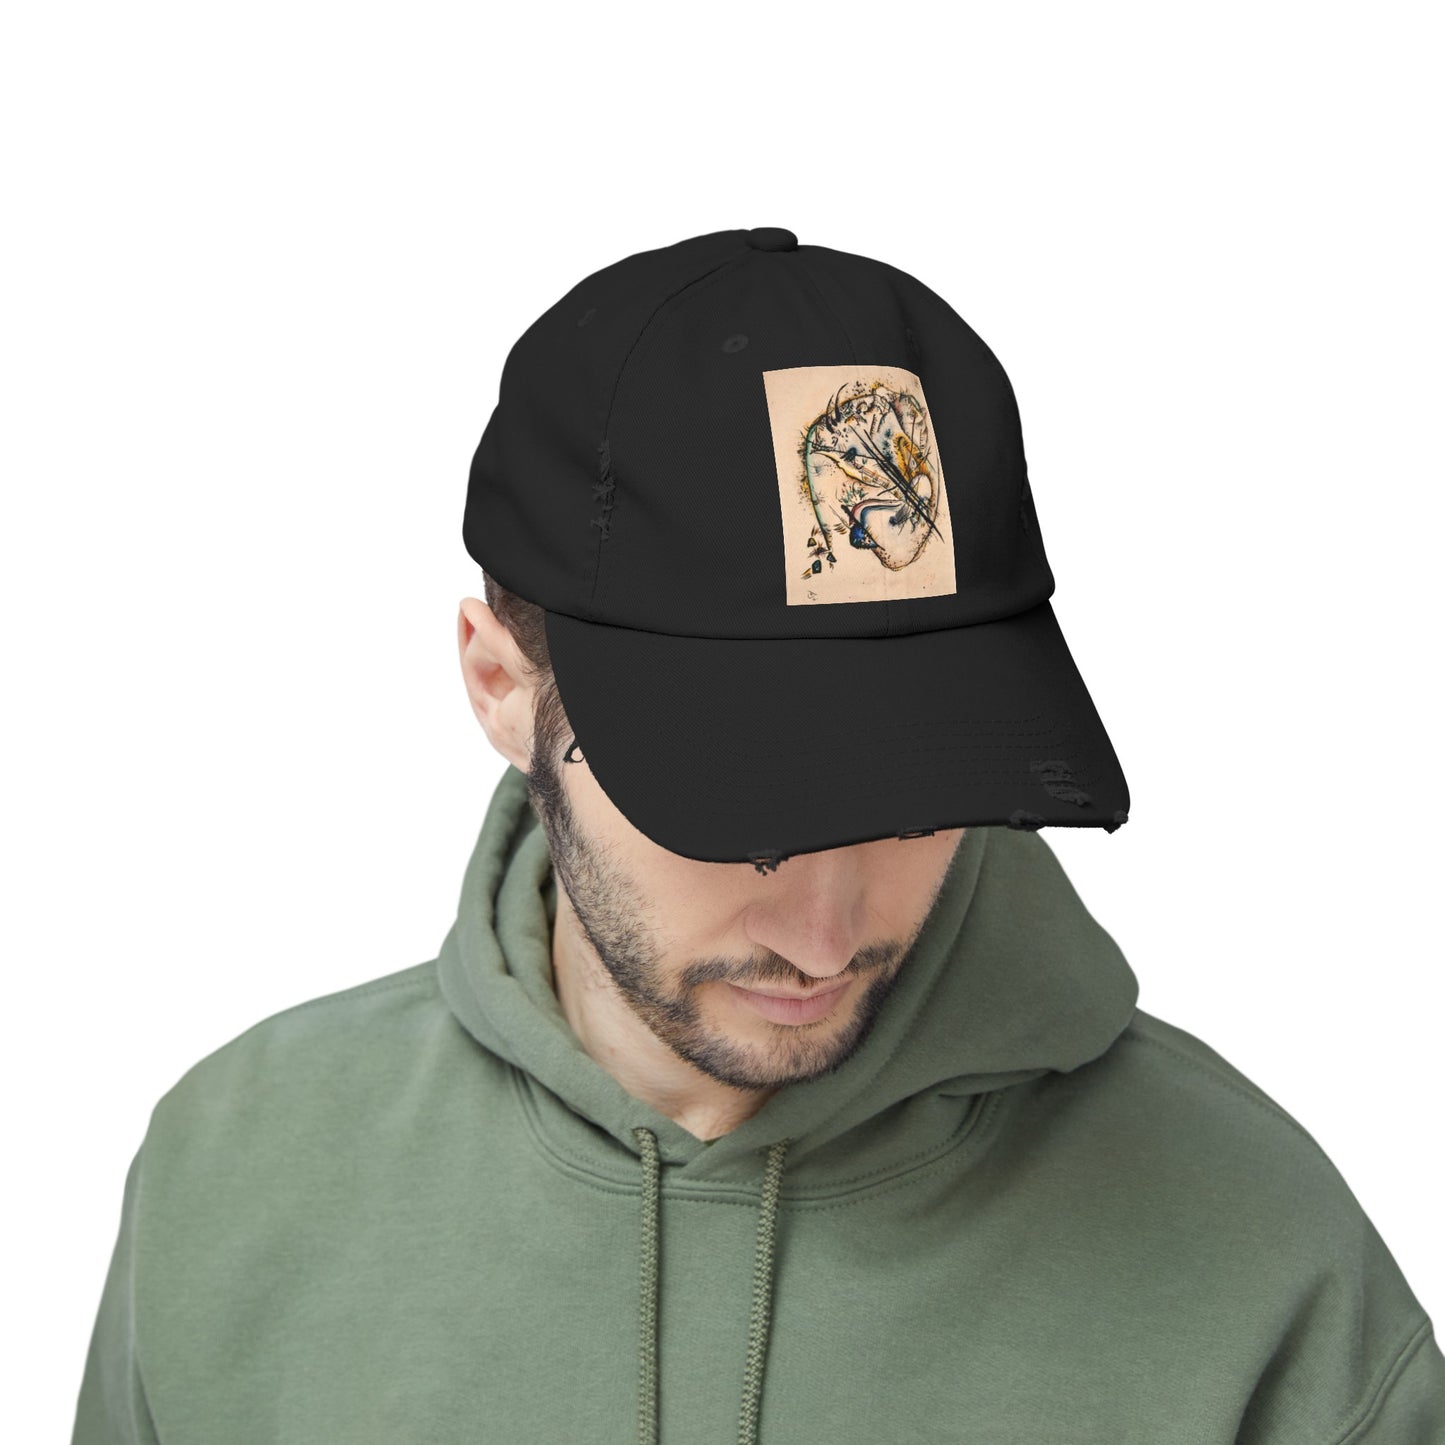 a man wearing a black hat with a picture of a tiger on it